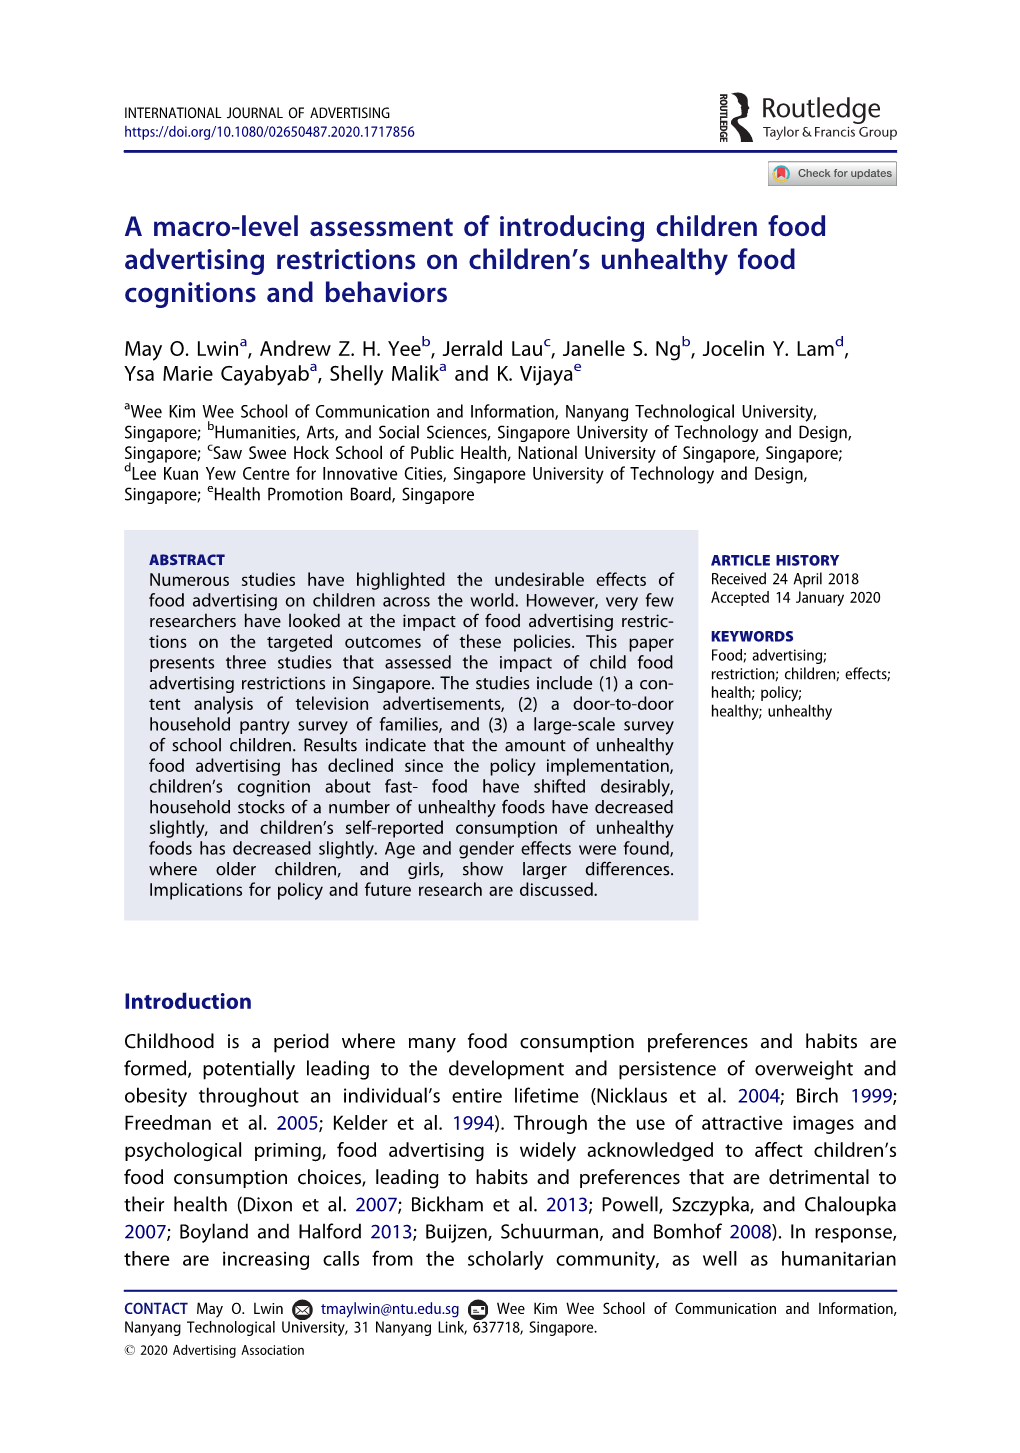 A Macro-Level Assessment of Introducing Children Food Advertising Restrictions on Children's Unhealthy Food Cognitions And